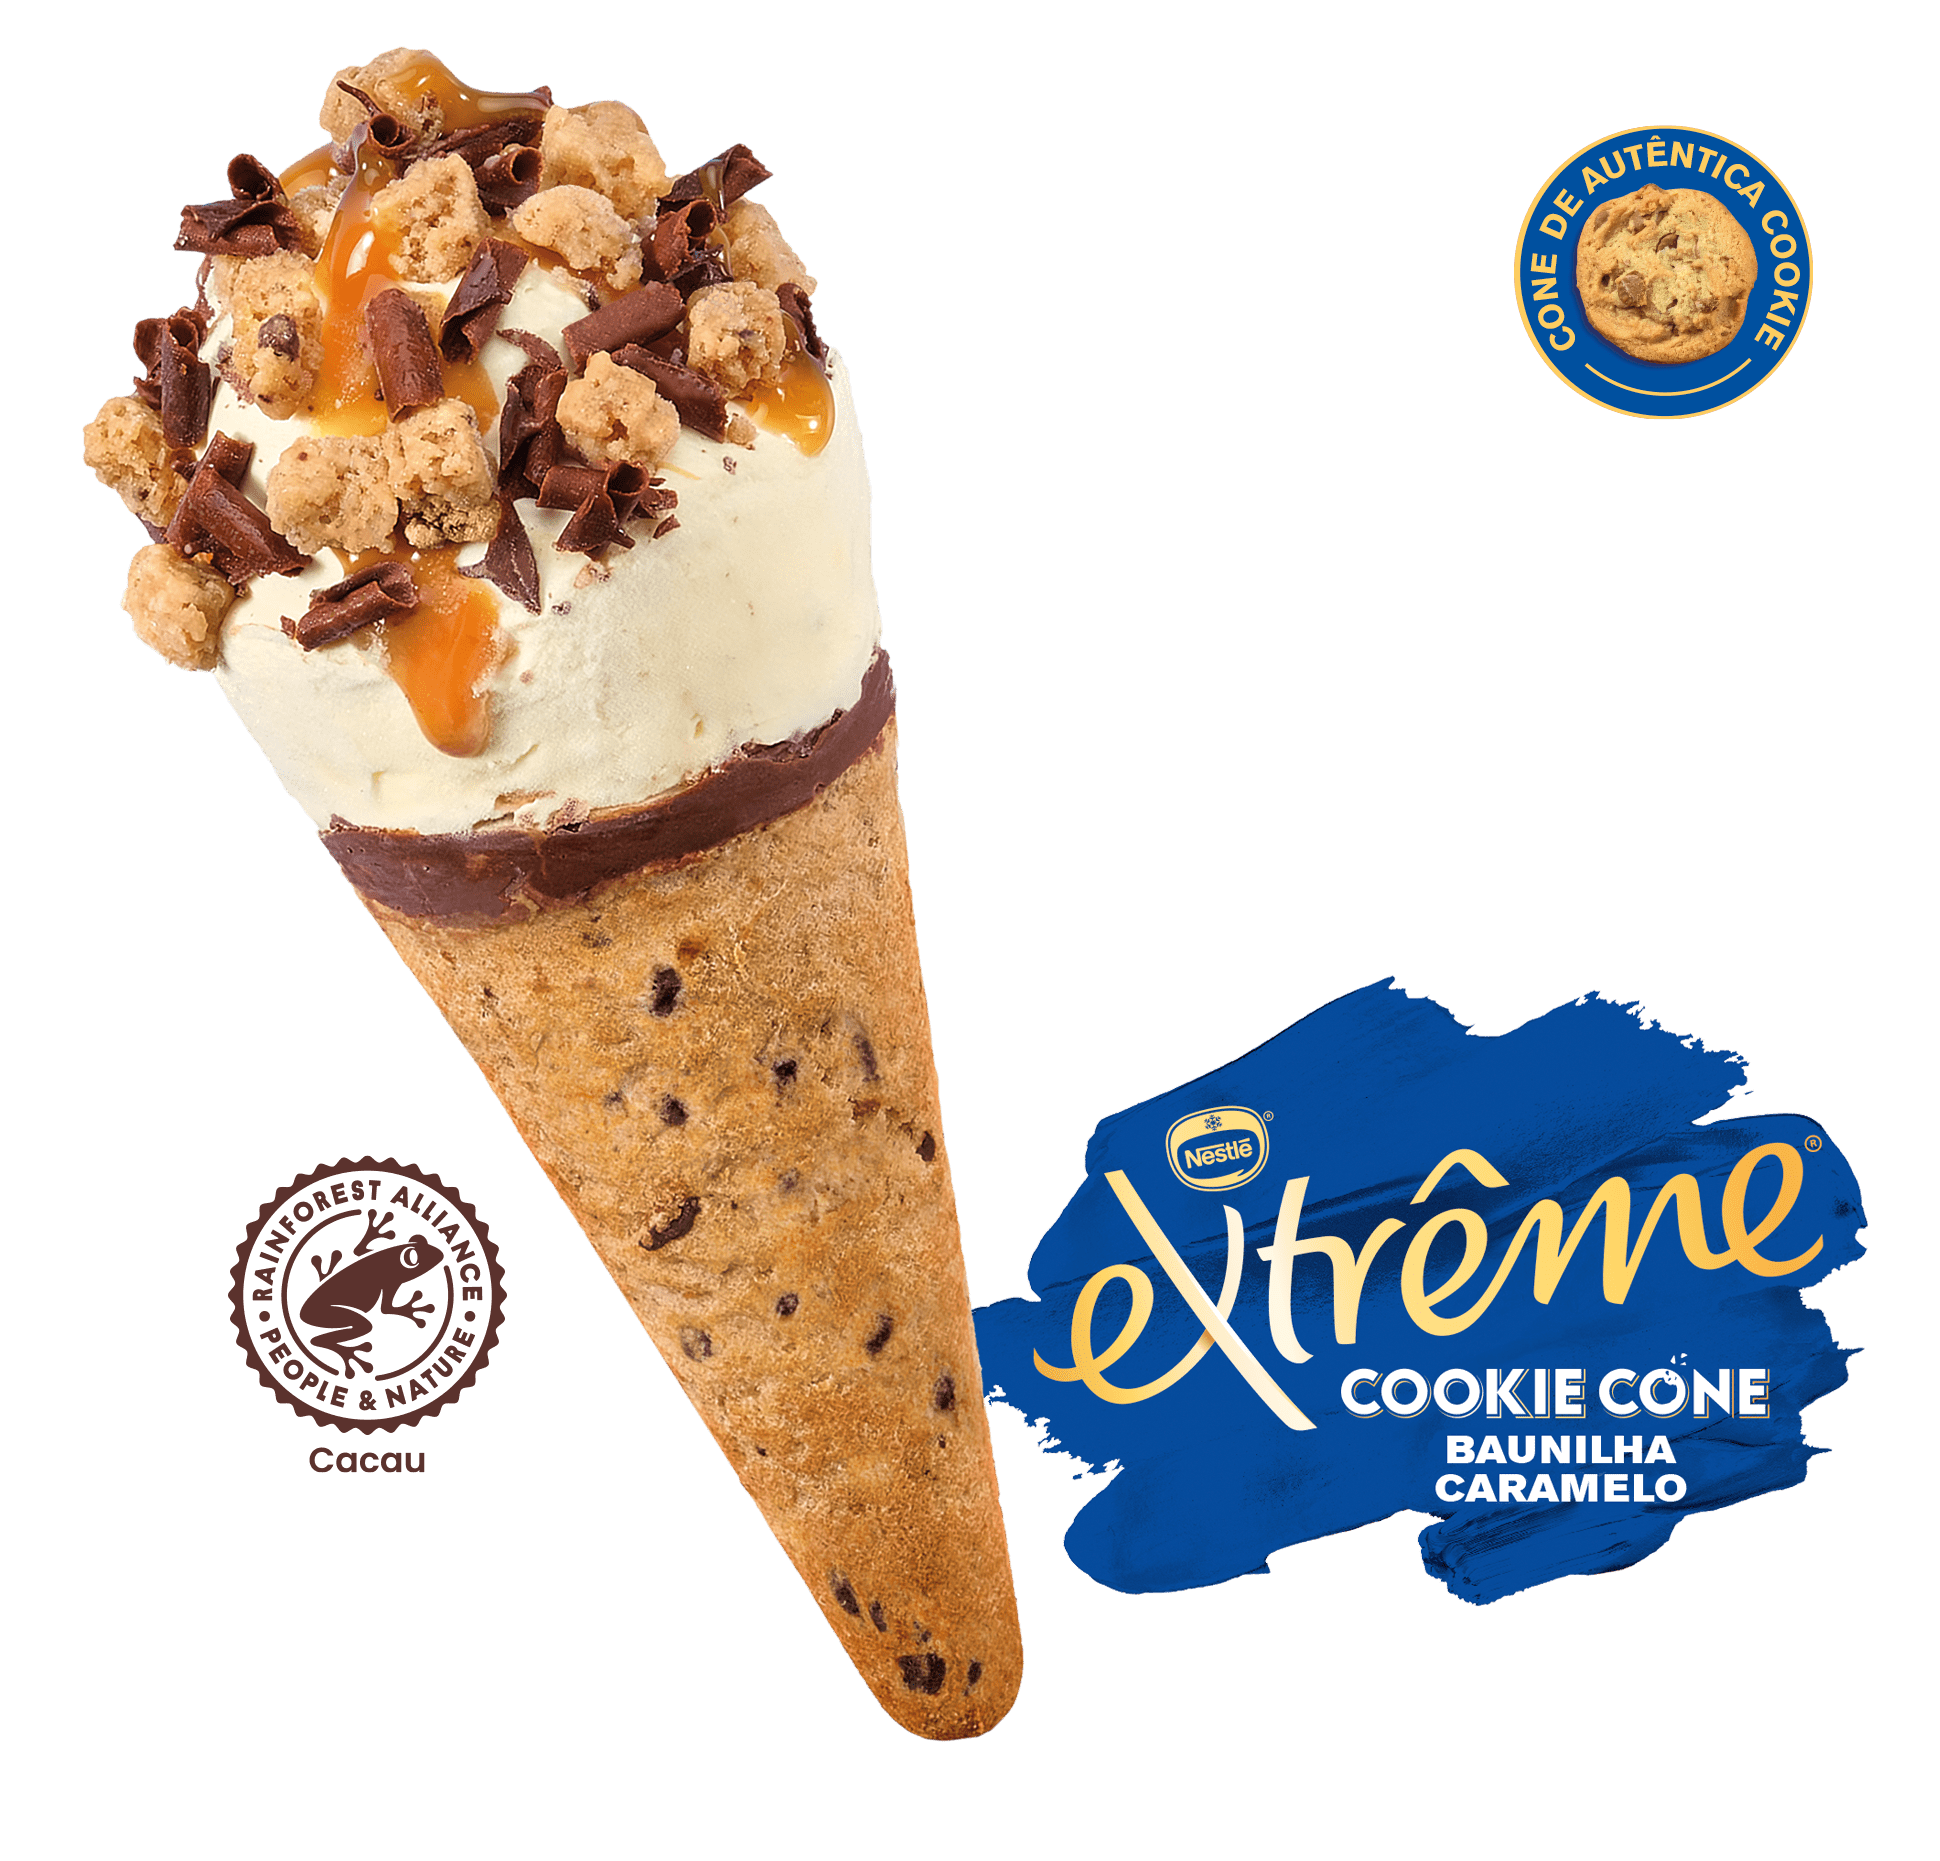 EXTREME COOKIE CONE CARAMELO